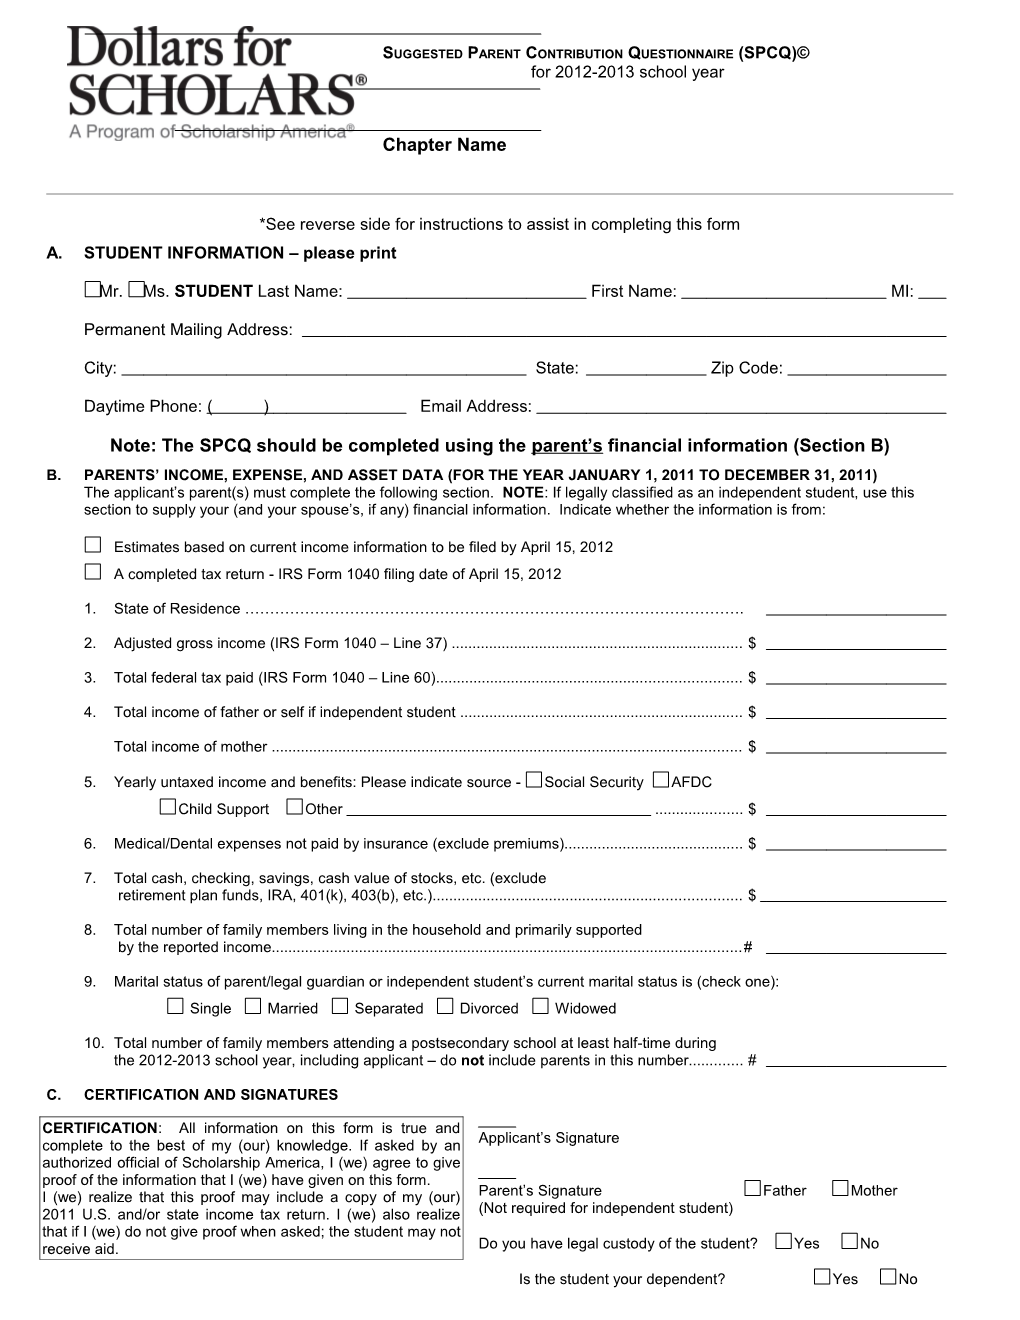 *See Reverse Side for Instructions to Assist in Completing This Form